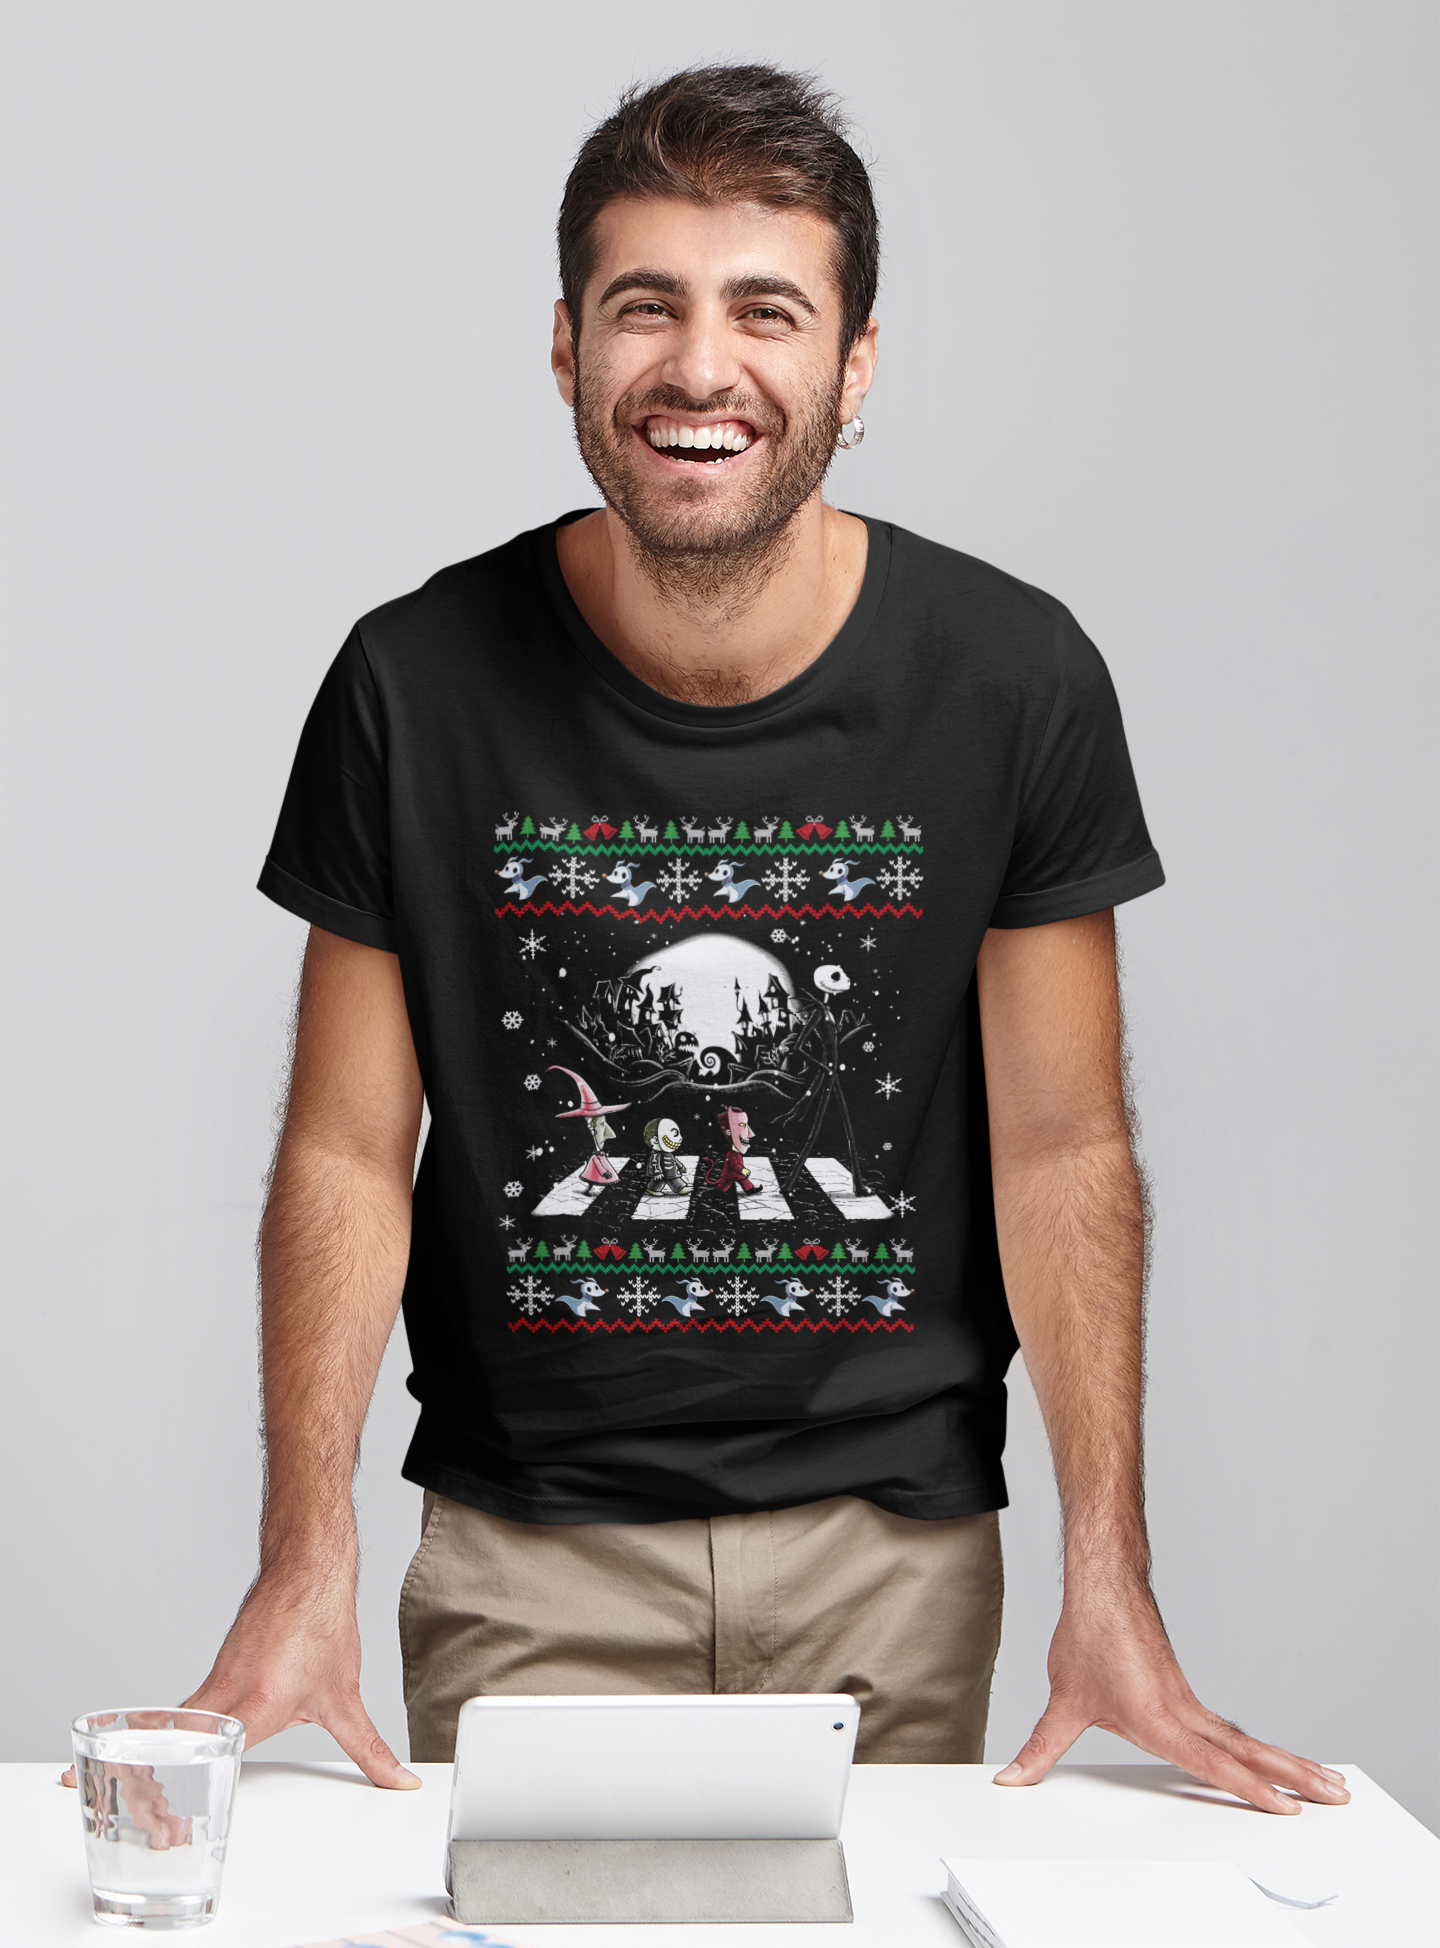 Nightmare Before Christmas Ugly Sweater Shirt, Abbey Road T Shirt, Jack Skellington And Friends Tshirt, Christmas Gifts